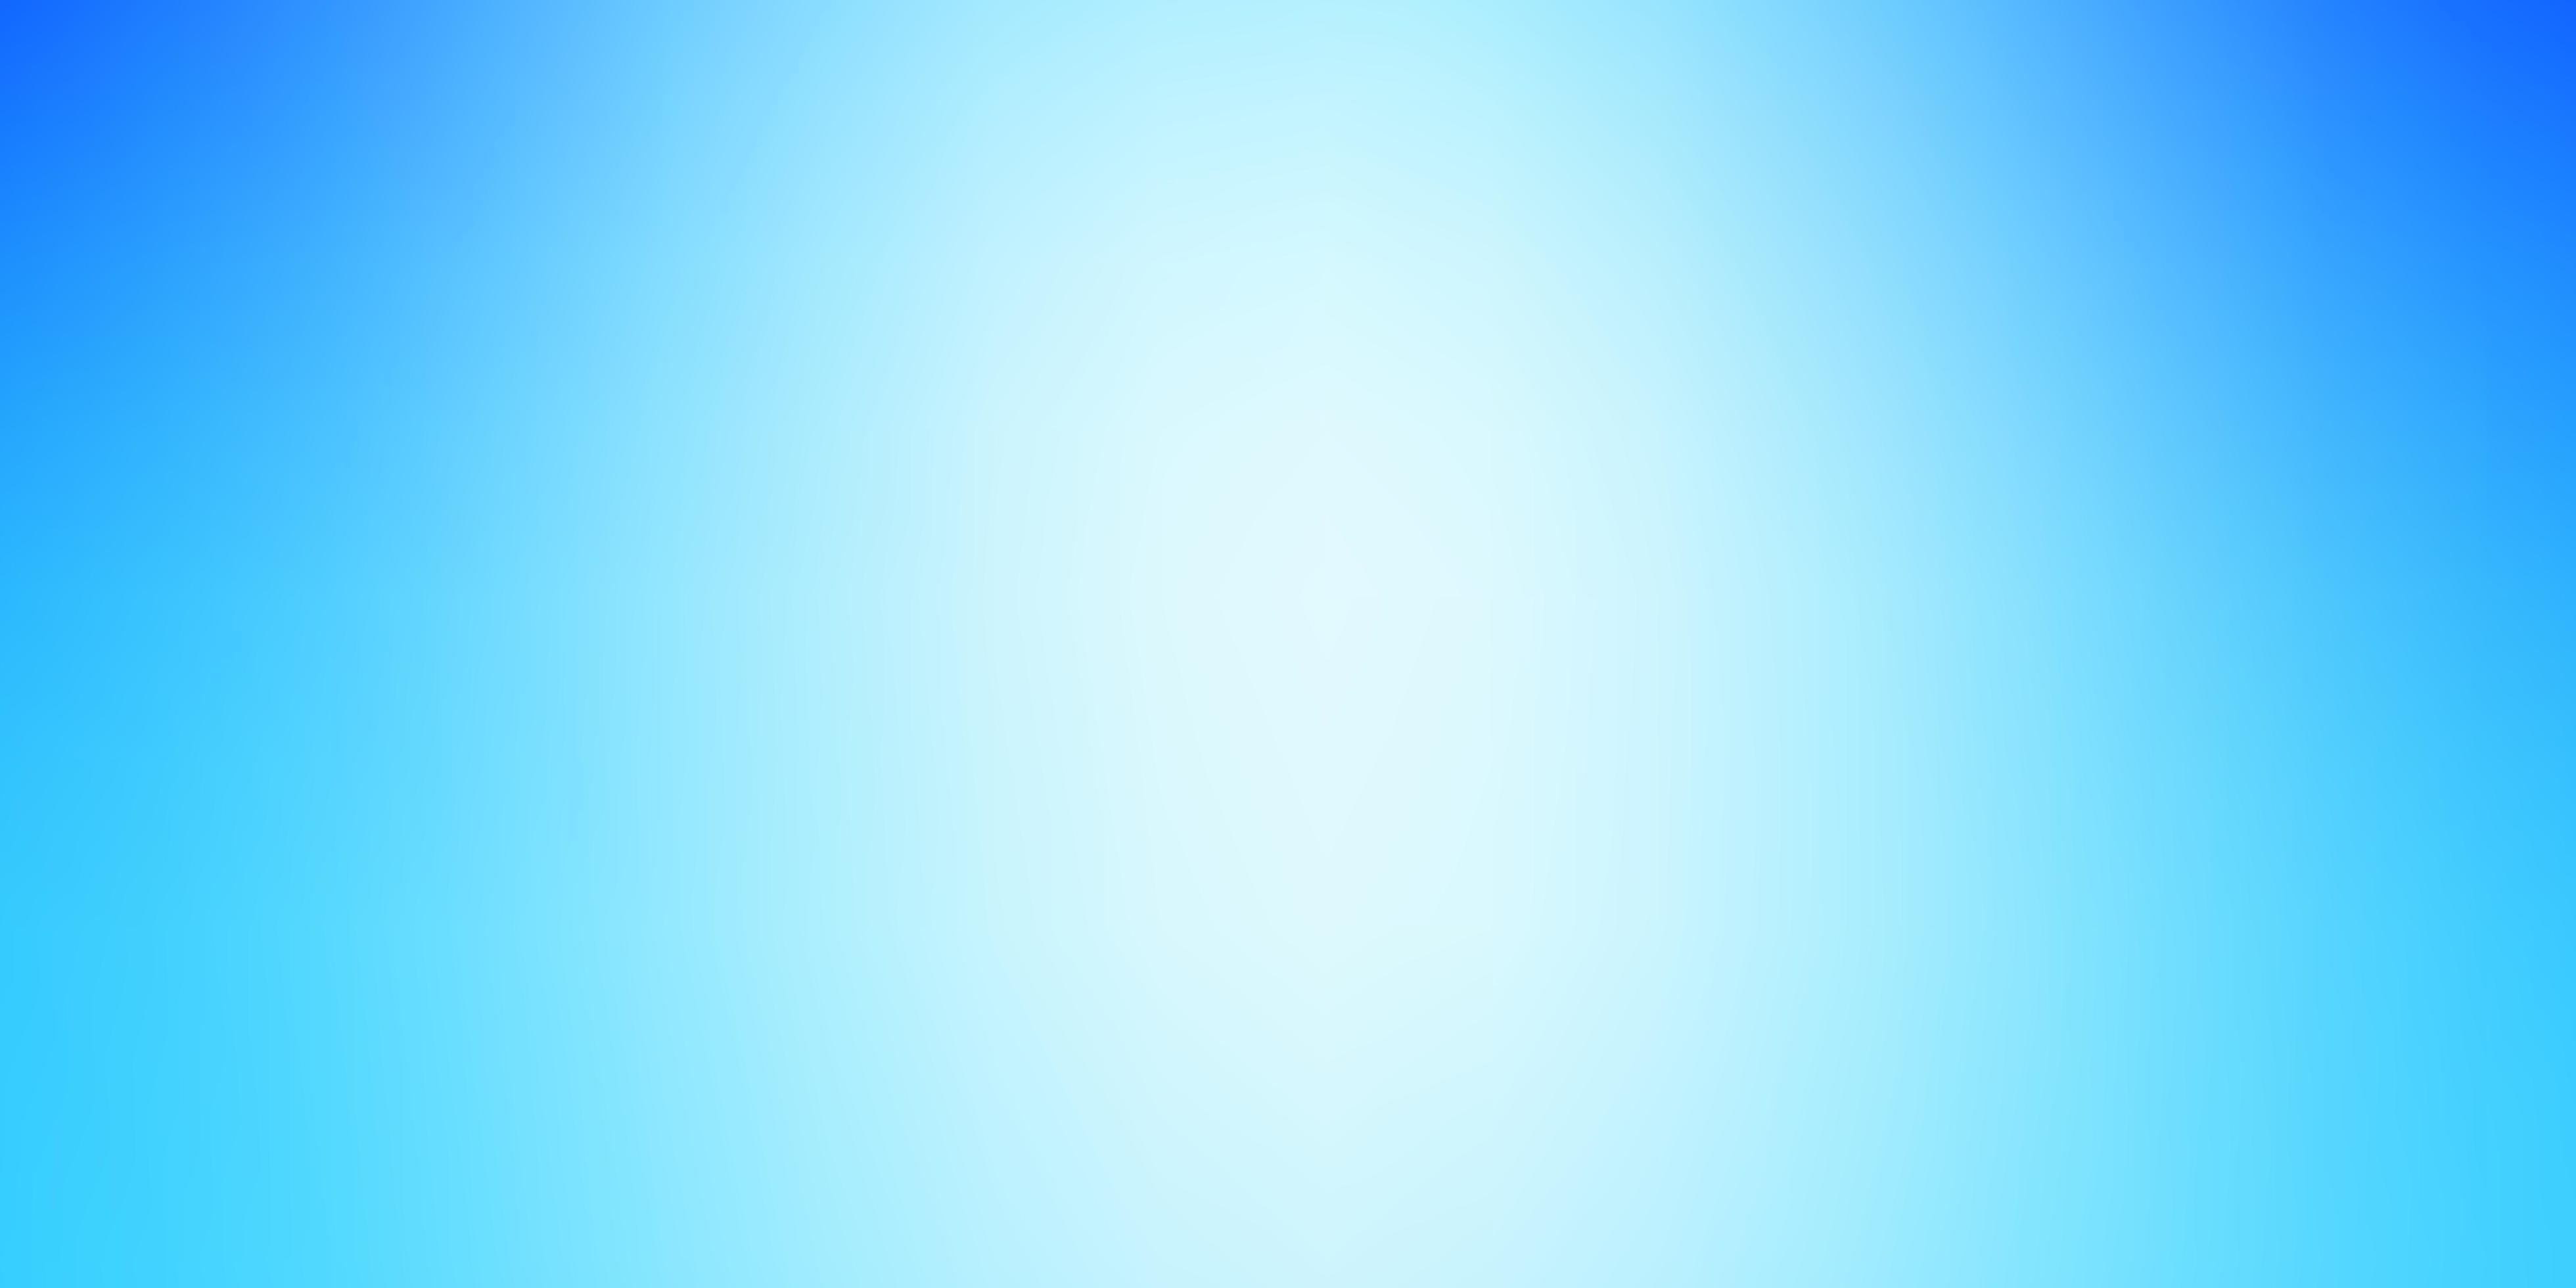 Light Blue Vector Abstract Background Colorful Illustration In